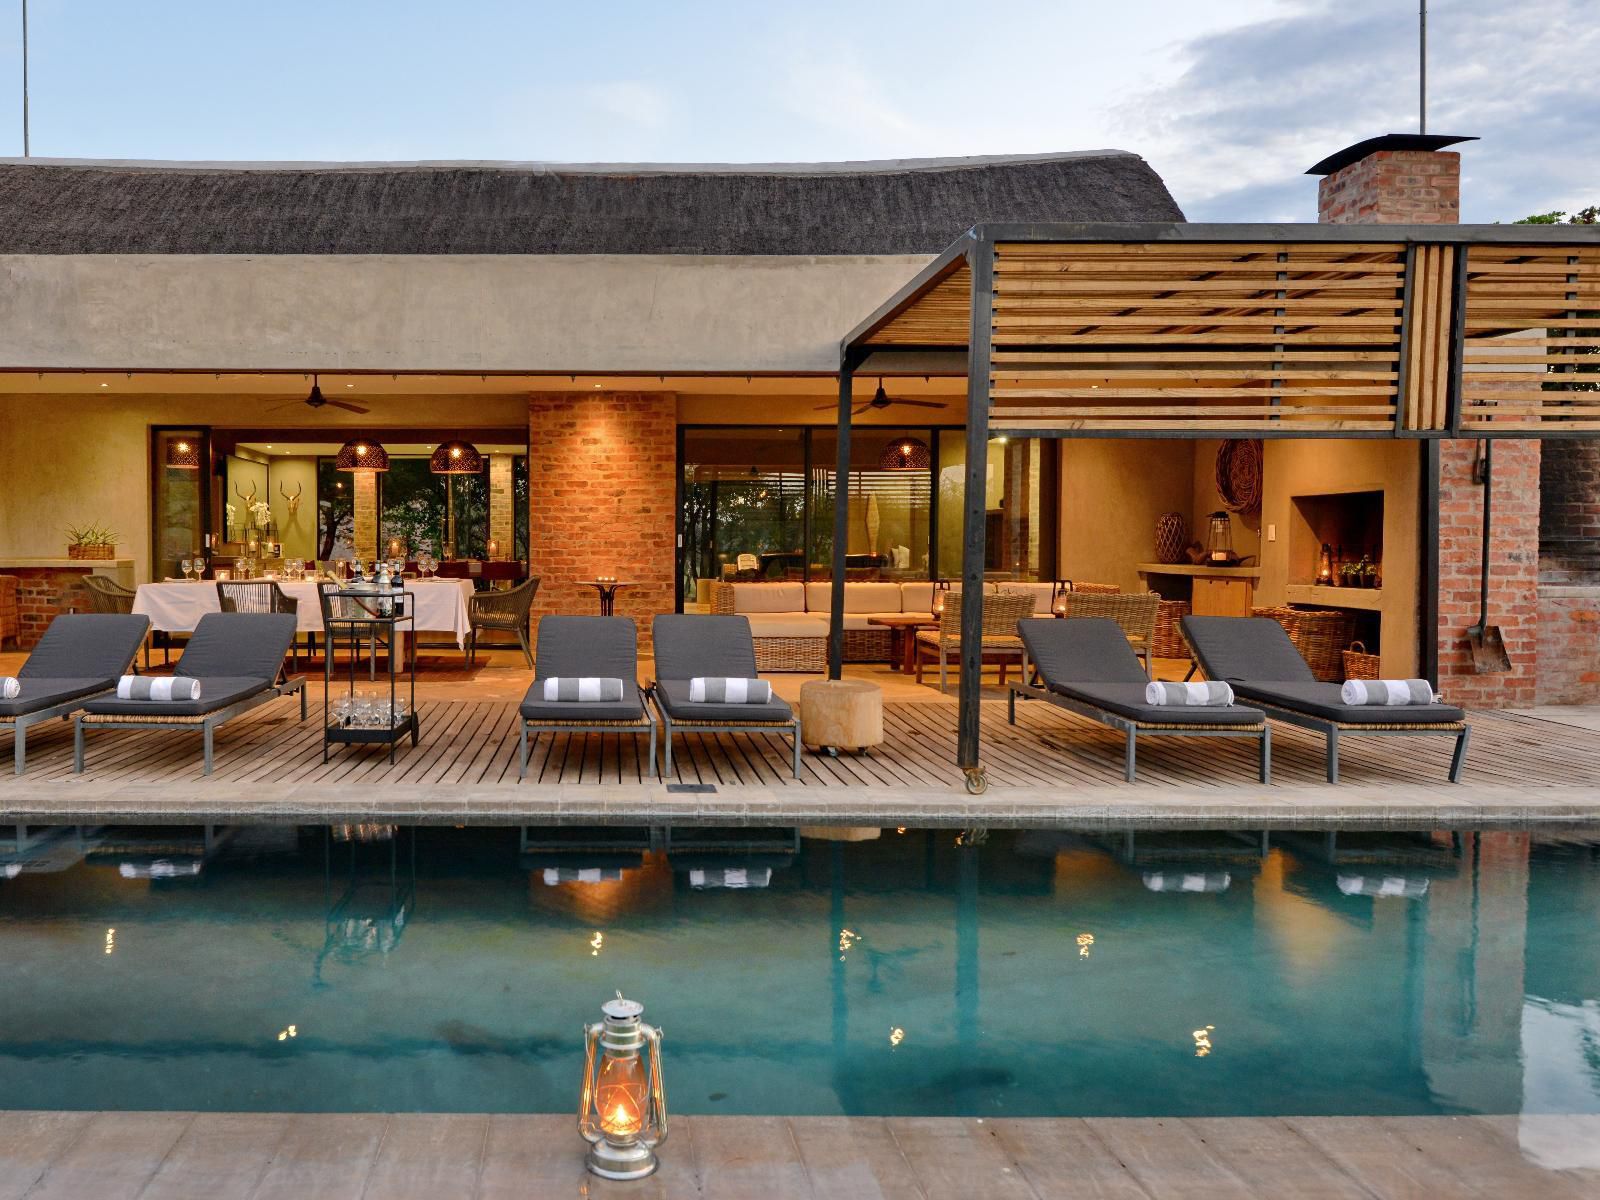 Ngala Lodge Dinokeng Game Reserve Gauteng South Africa House, Building, Architecture, Swimming Pool